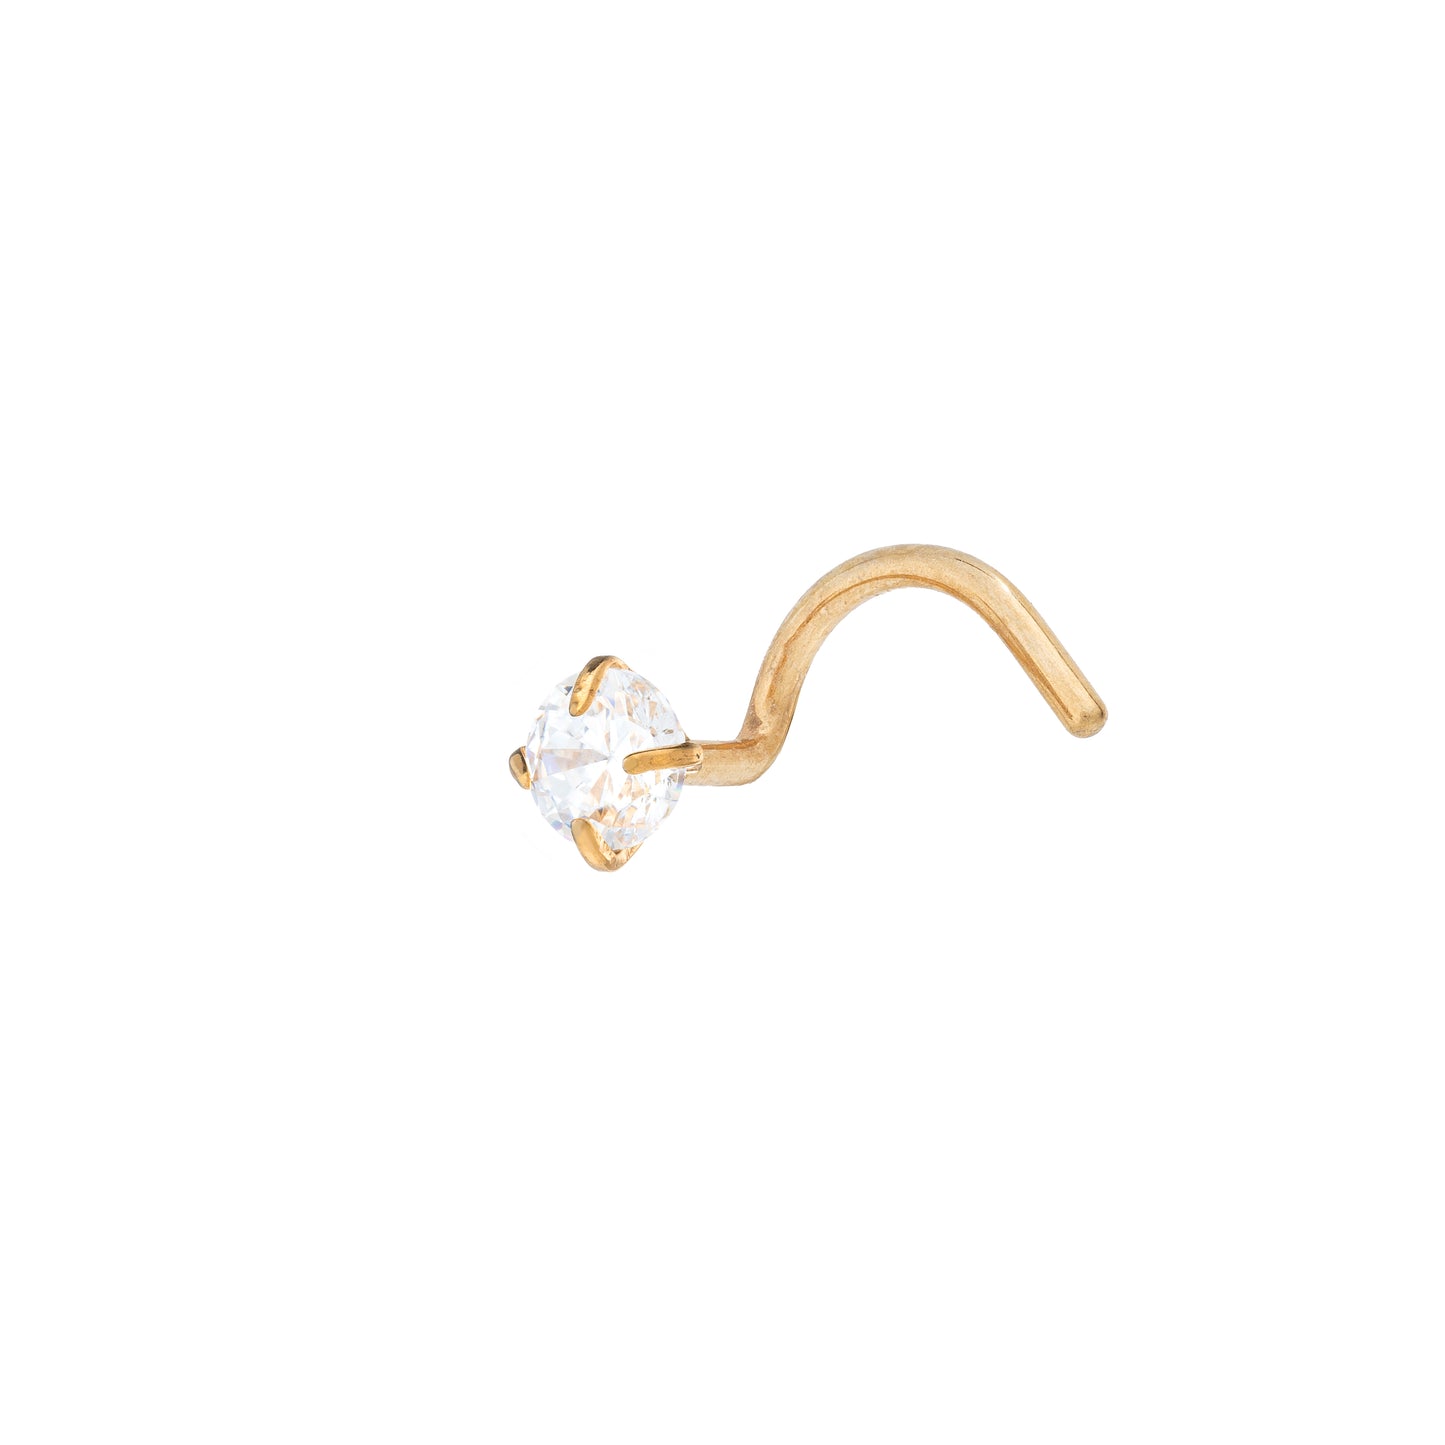 Titanium Gold PVD Plated Nostril Screw With Round Prong Set CZ Stone Top